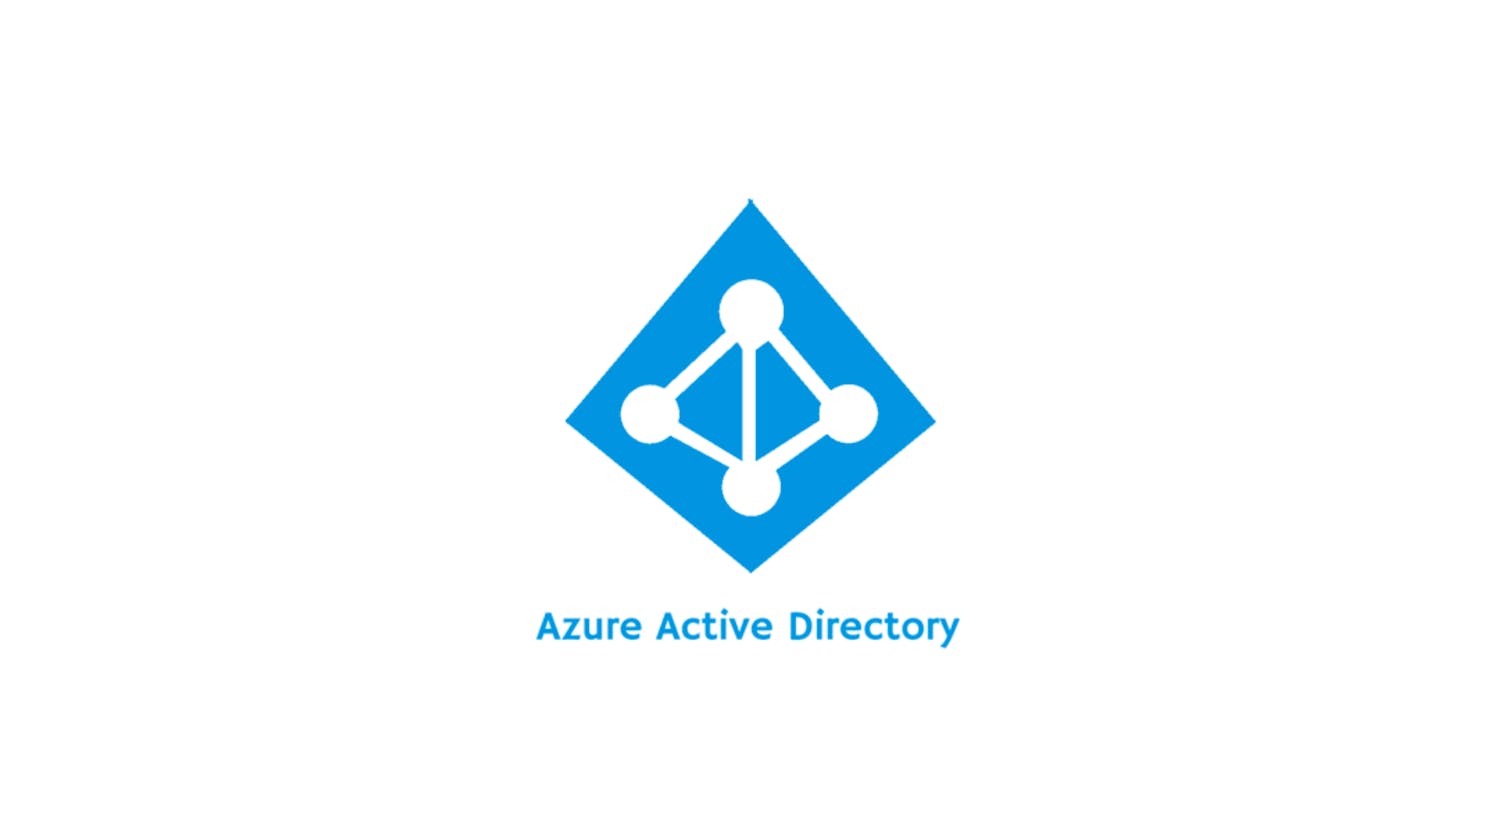 Day 02: Introduction to AZURE AD